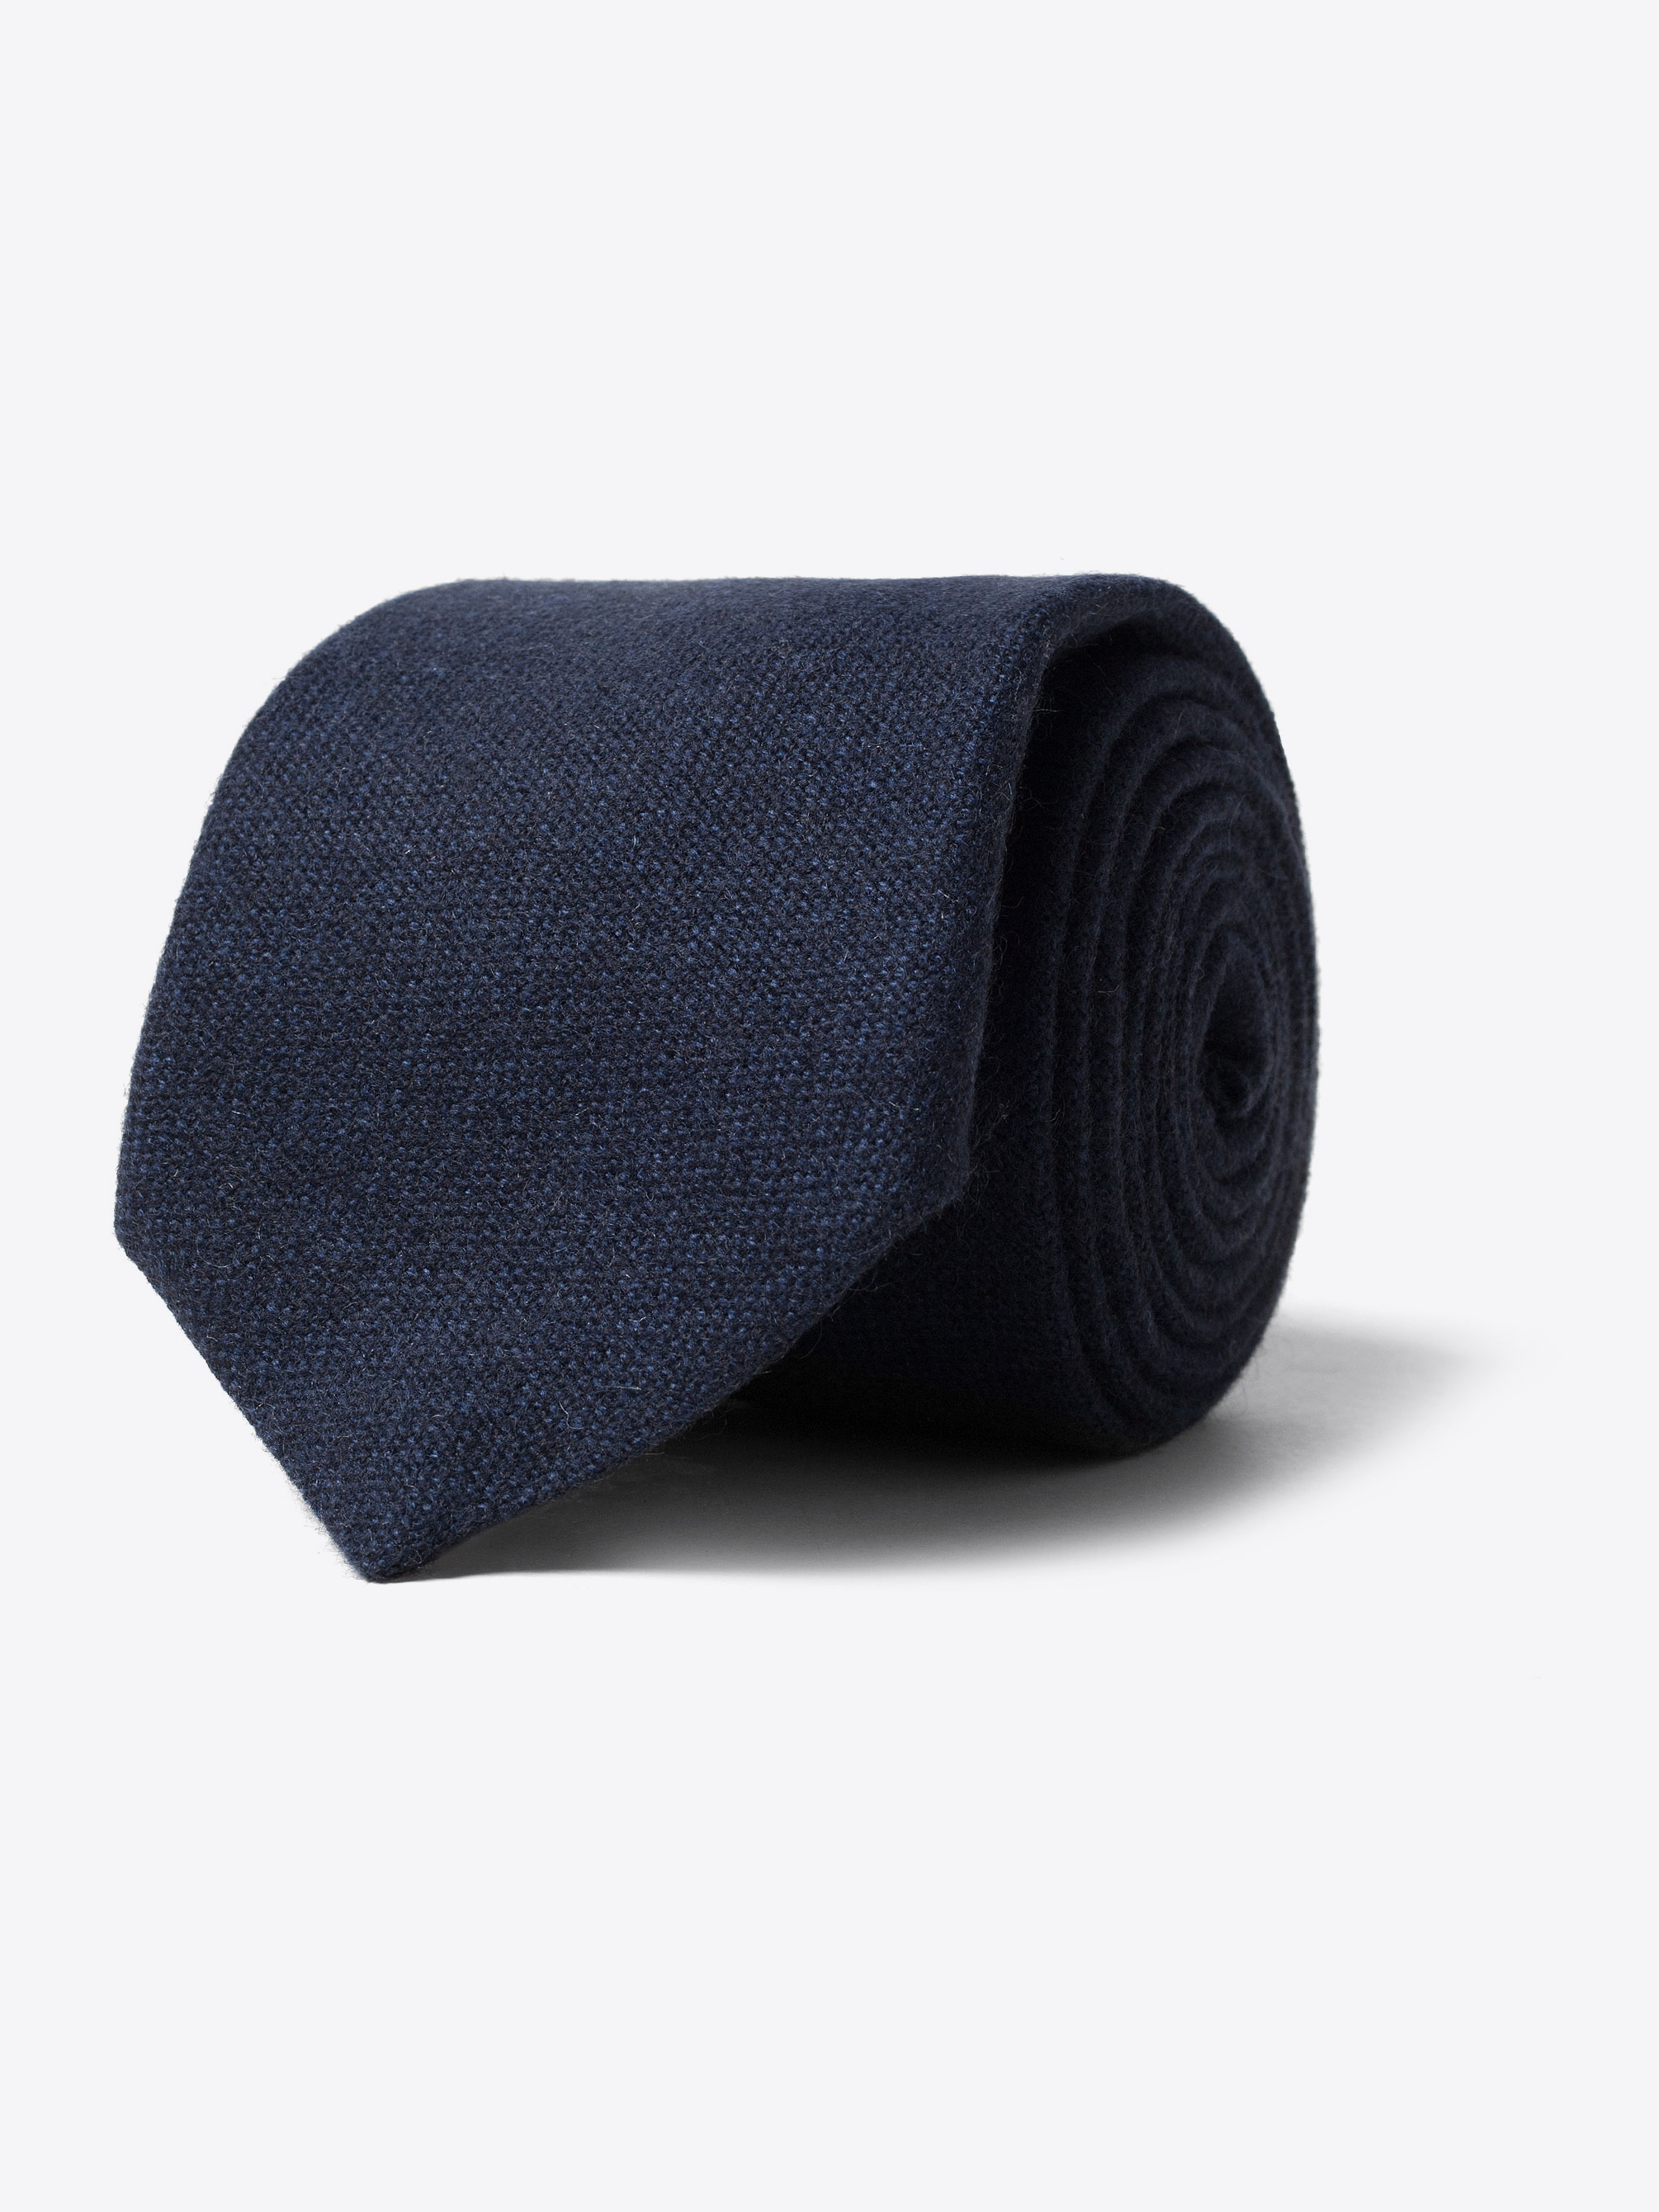 Zoom Image of Navy Pure Cashmere Tie